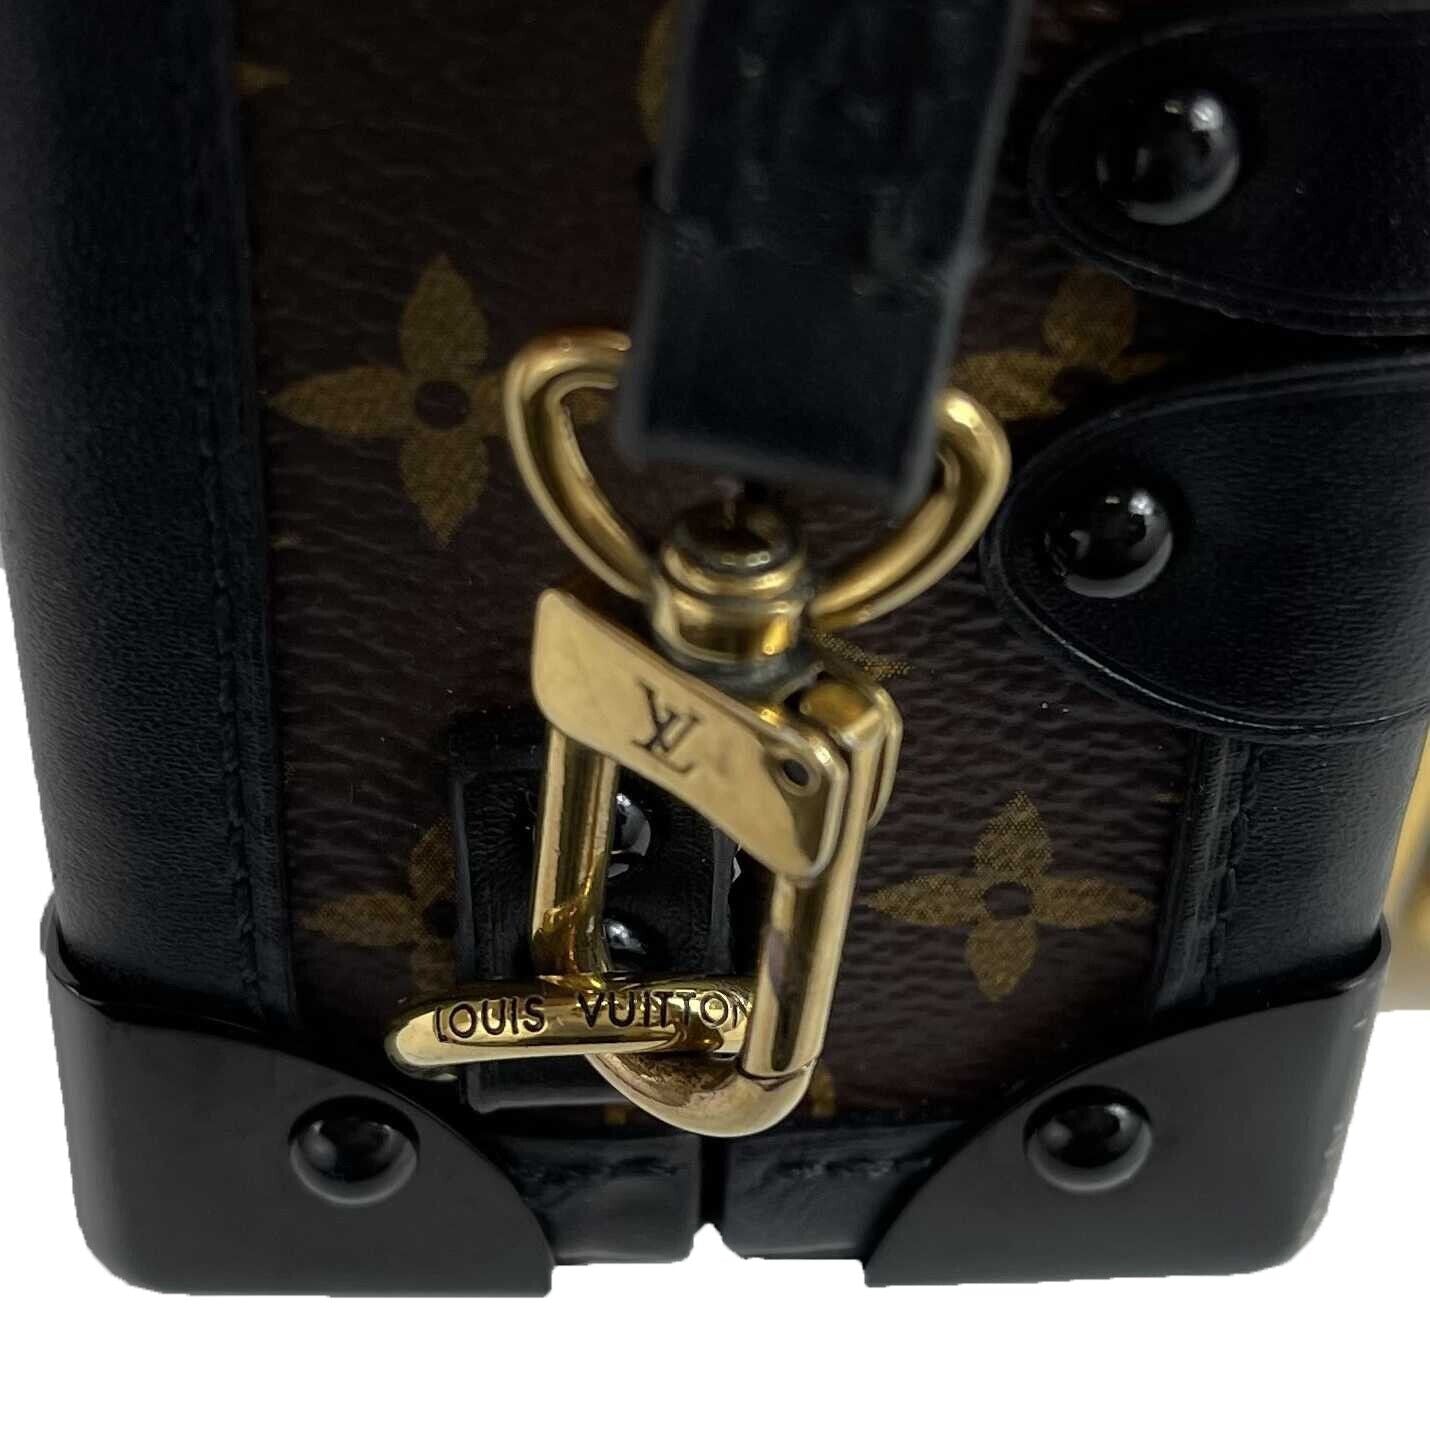 Sold at Auction: Louis Vuitton - LV m45943 Petite Malle Small Hard Case -  Brown / Black Crossbody